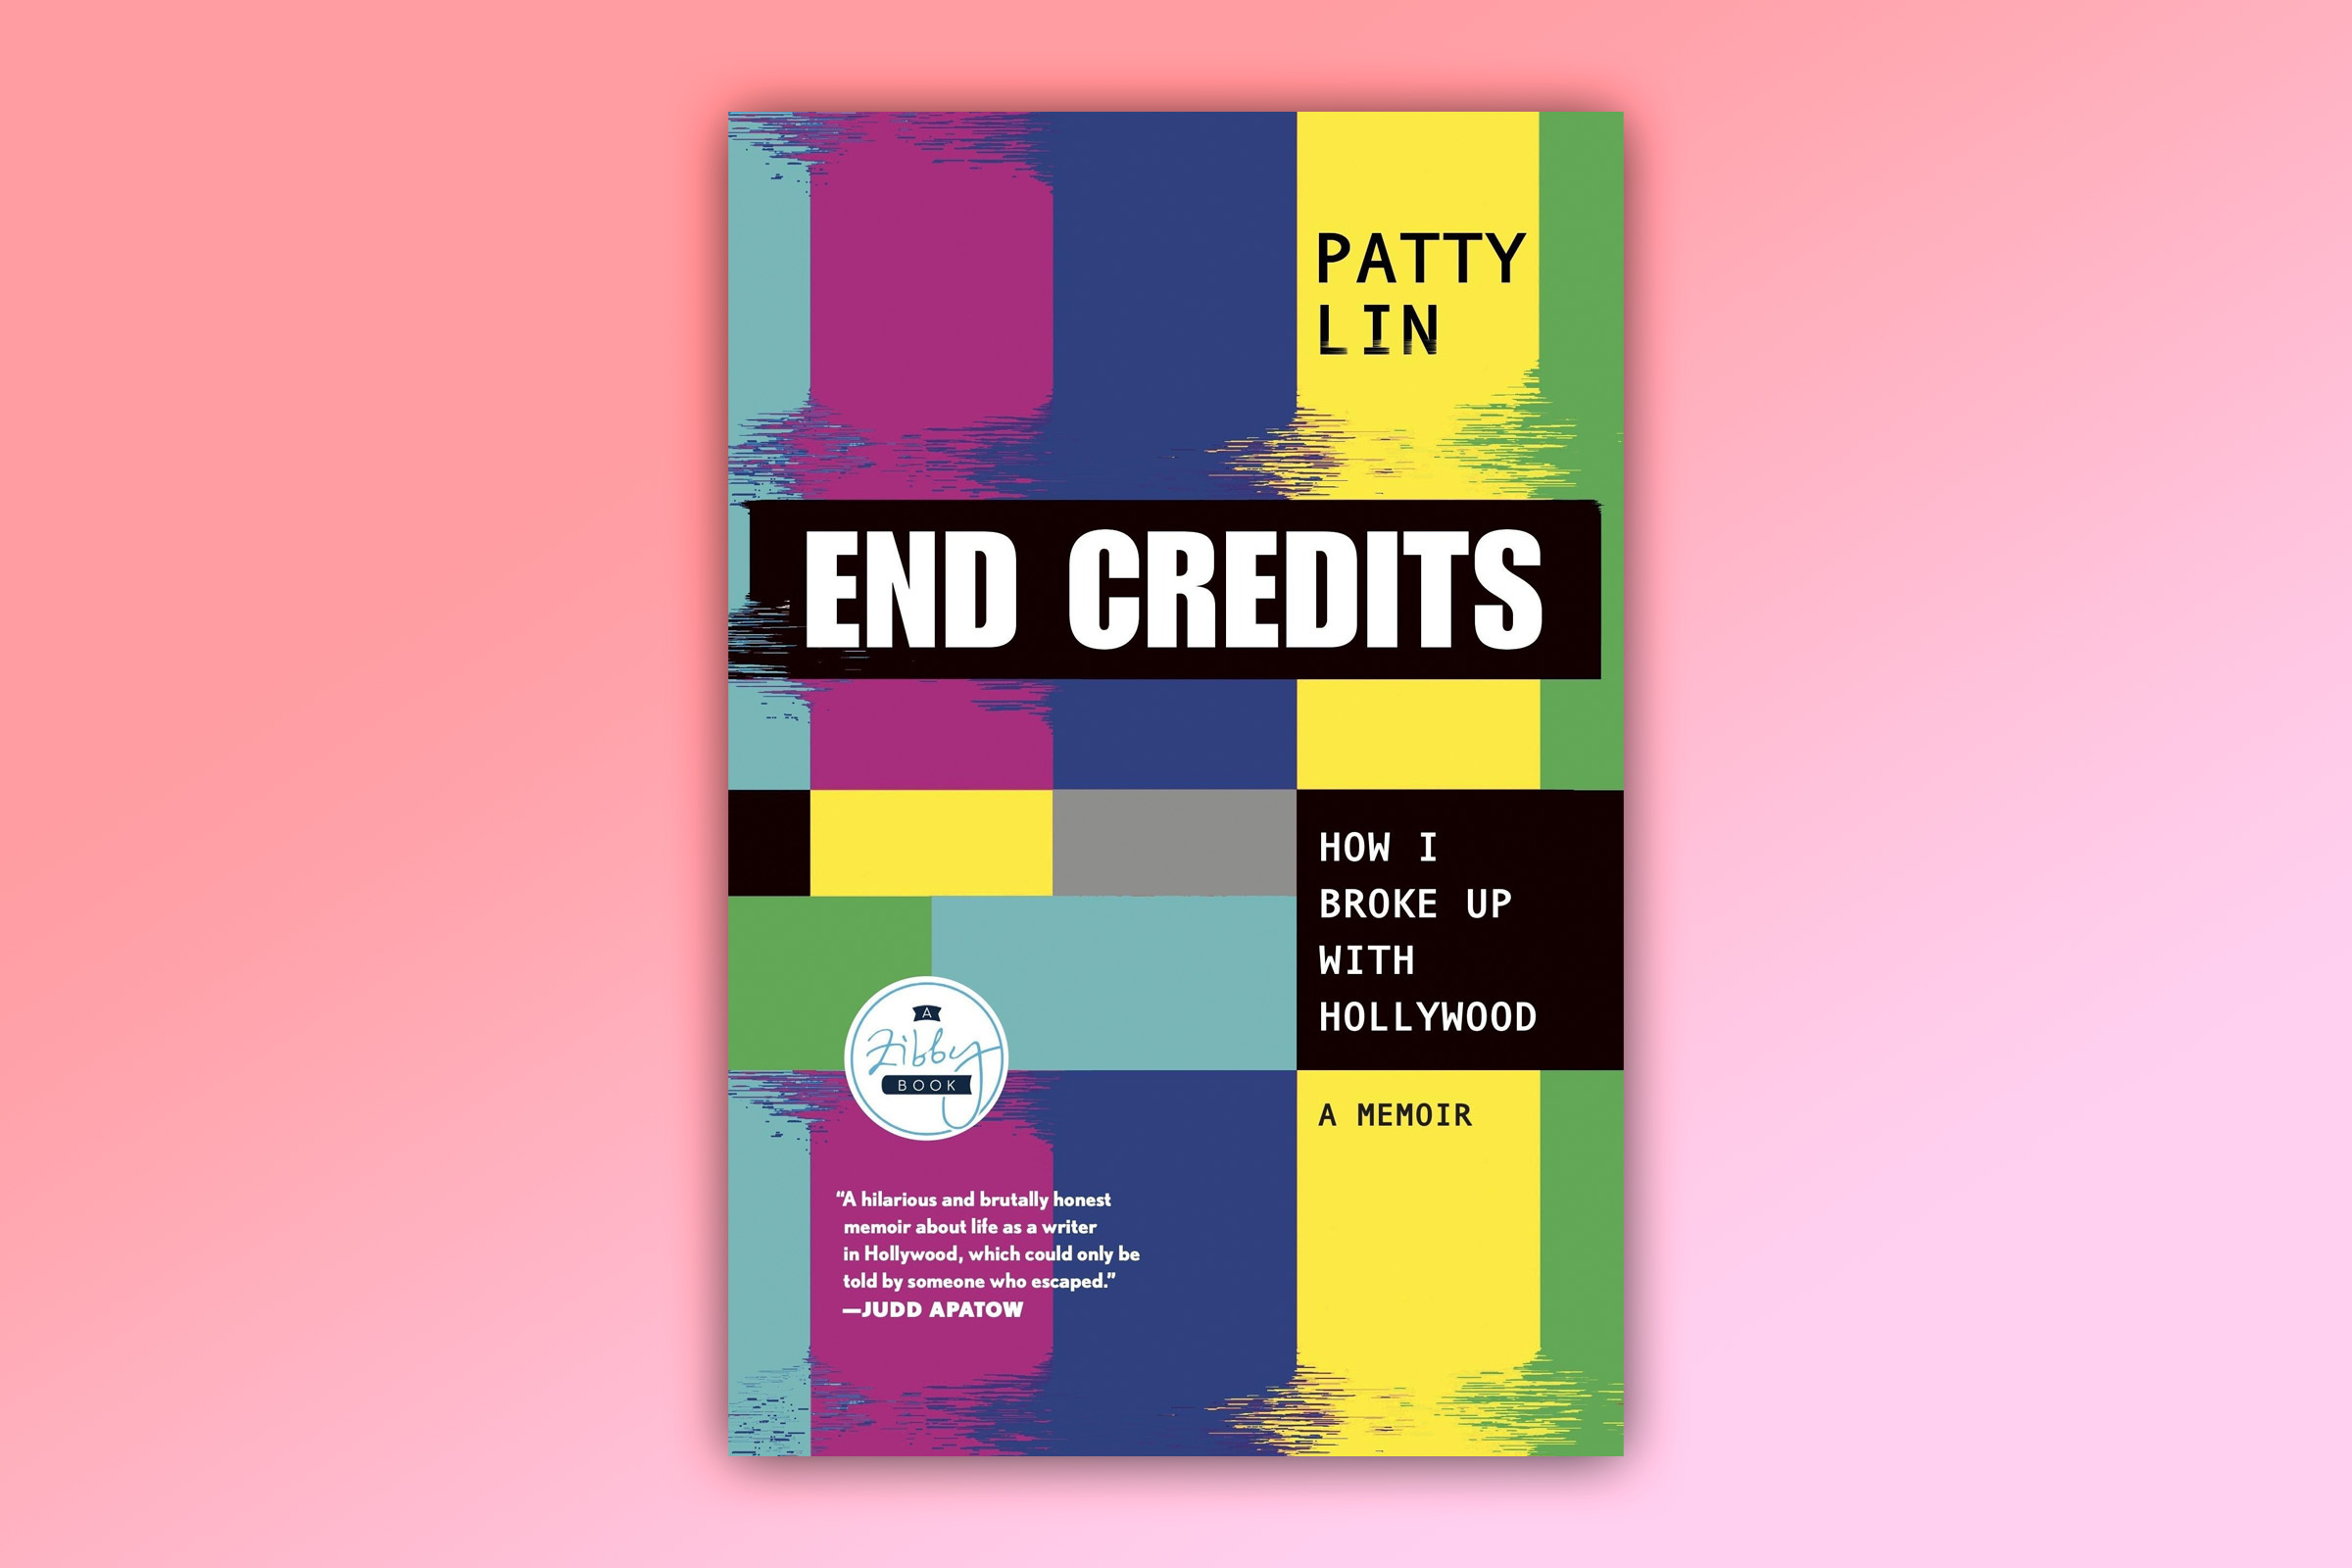 End Credits by Patty Lin